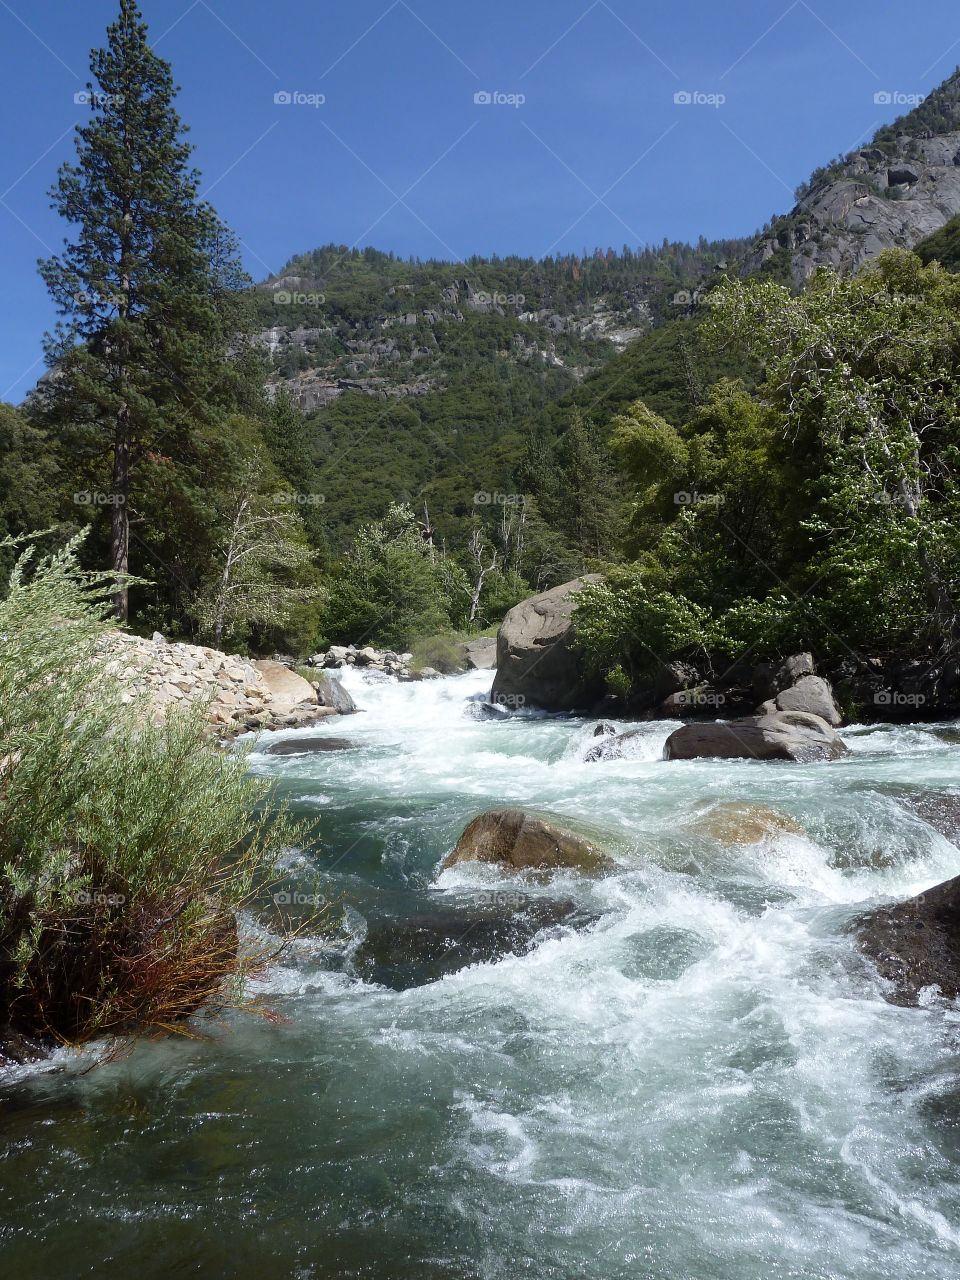 Gorgeous Rapids. Kings River in Kings Canyon California